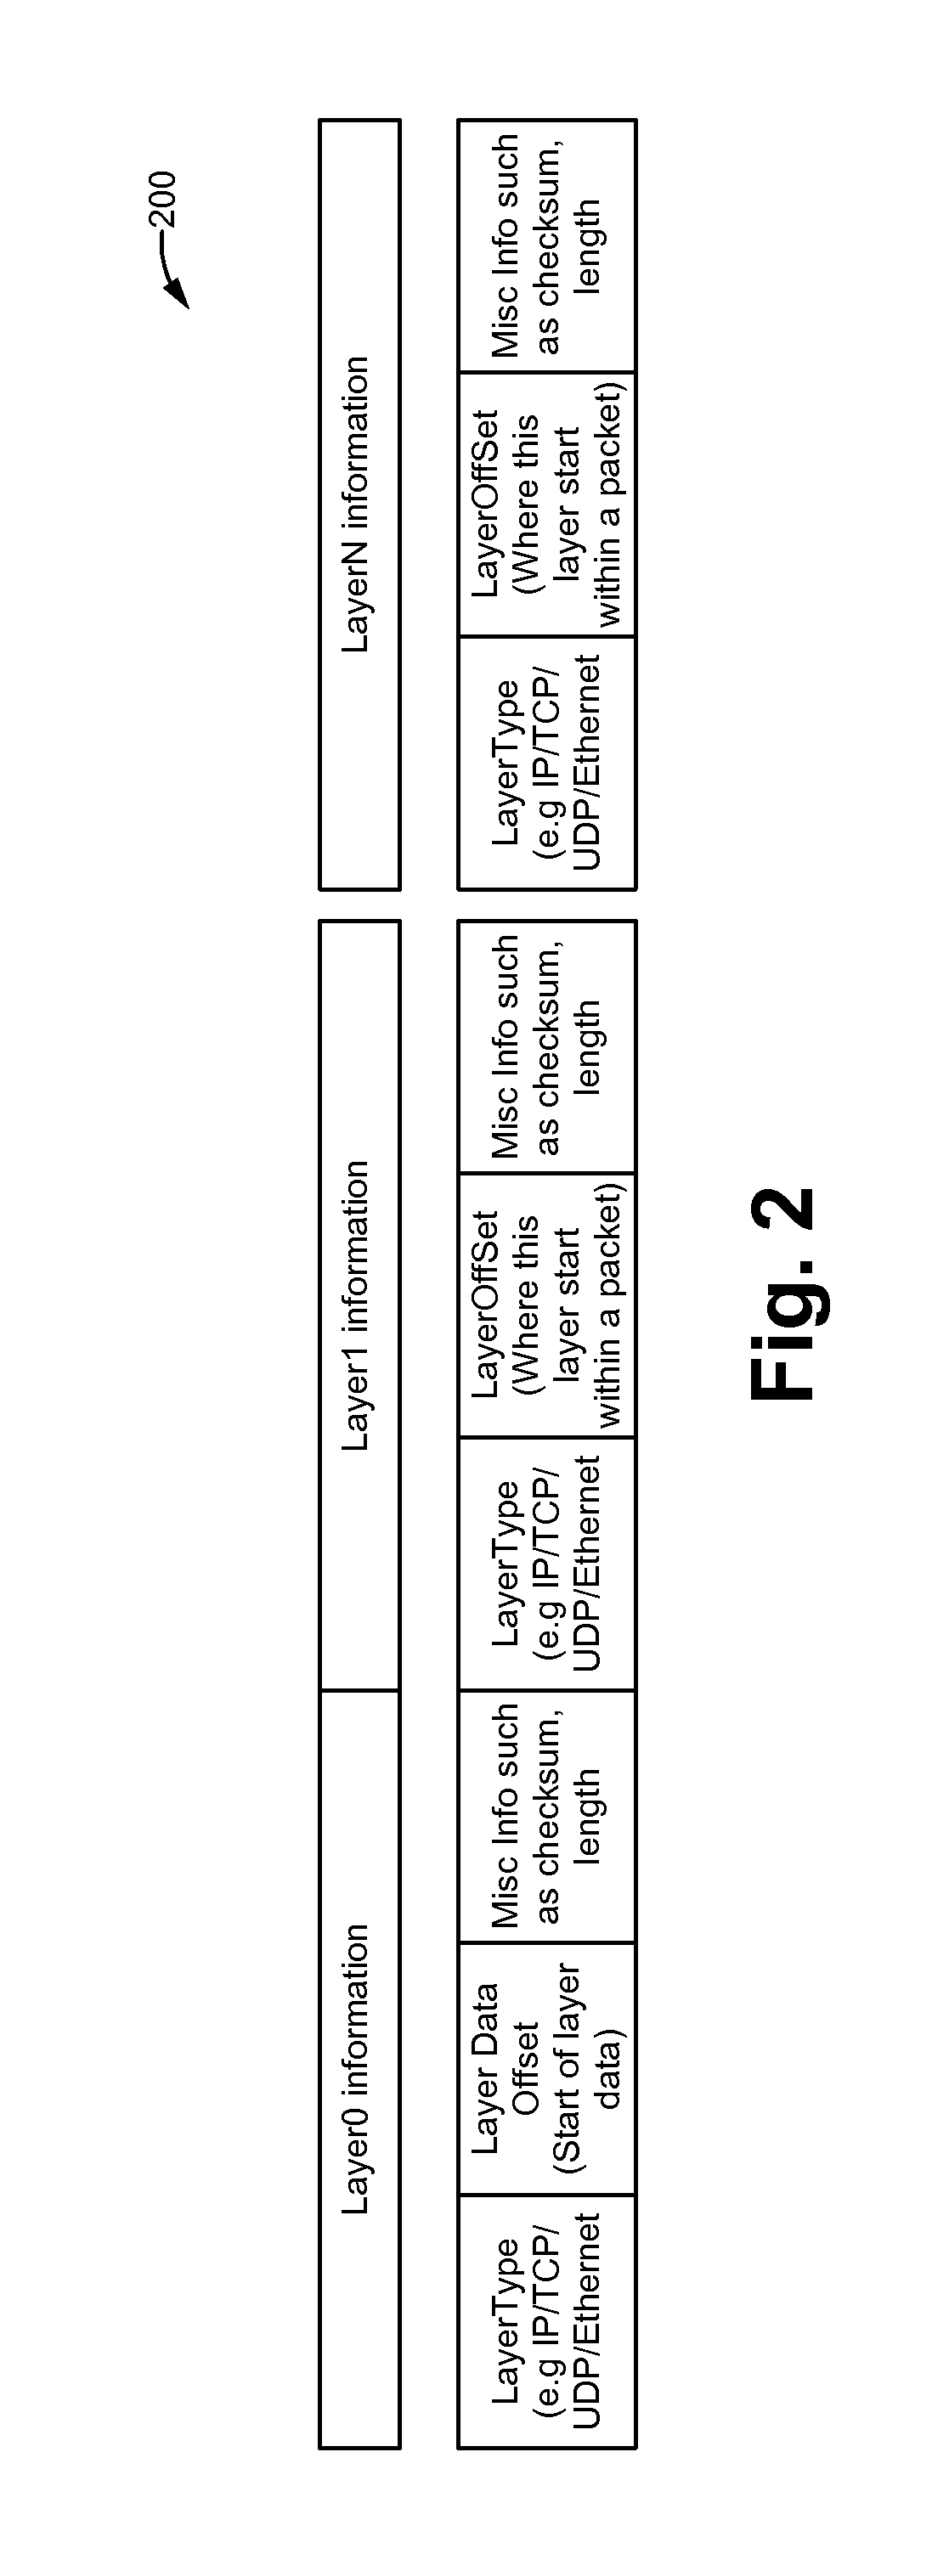 Method of using bit vectors to allow expansion and collapse of header layers within packets for enabling flexible modifications and an apparatus thereof